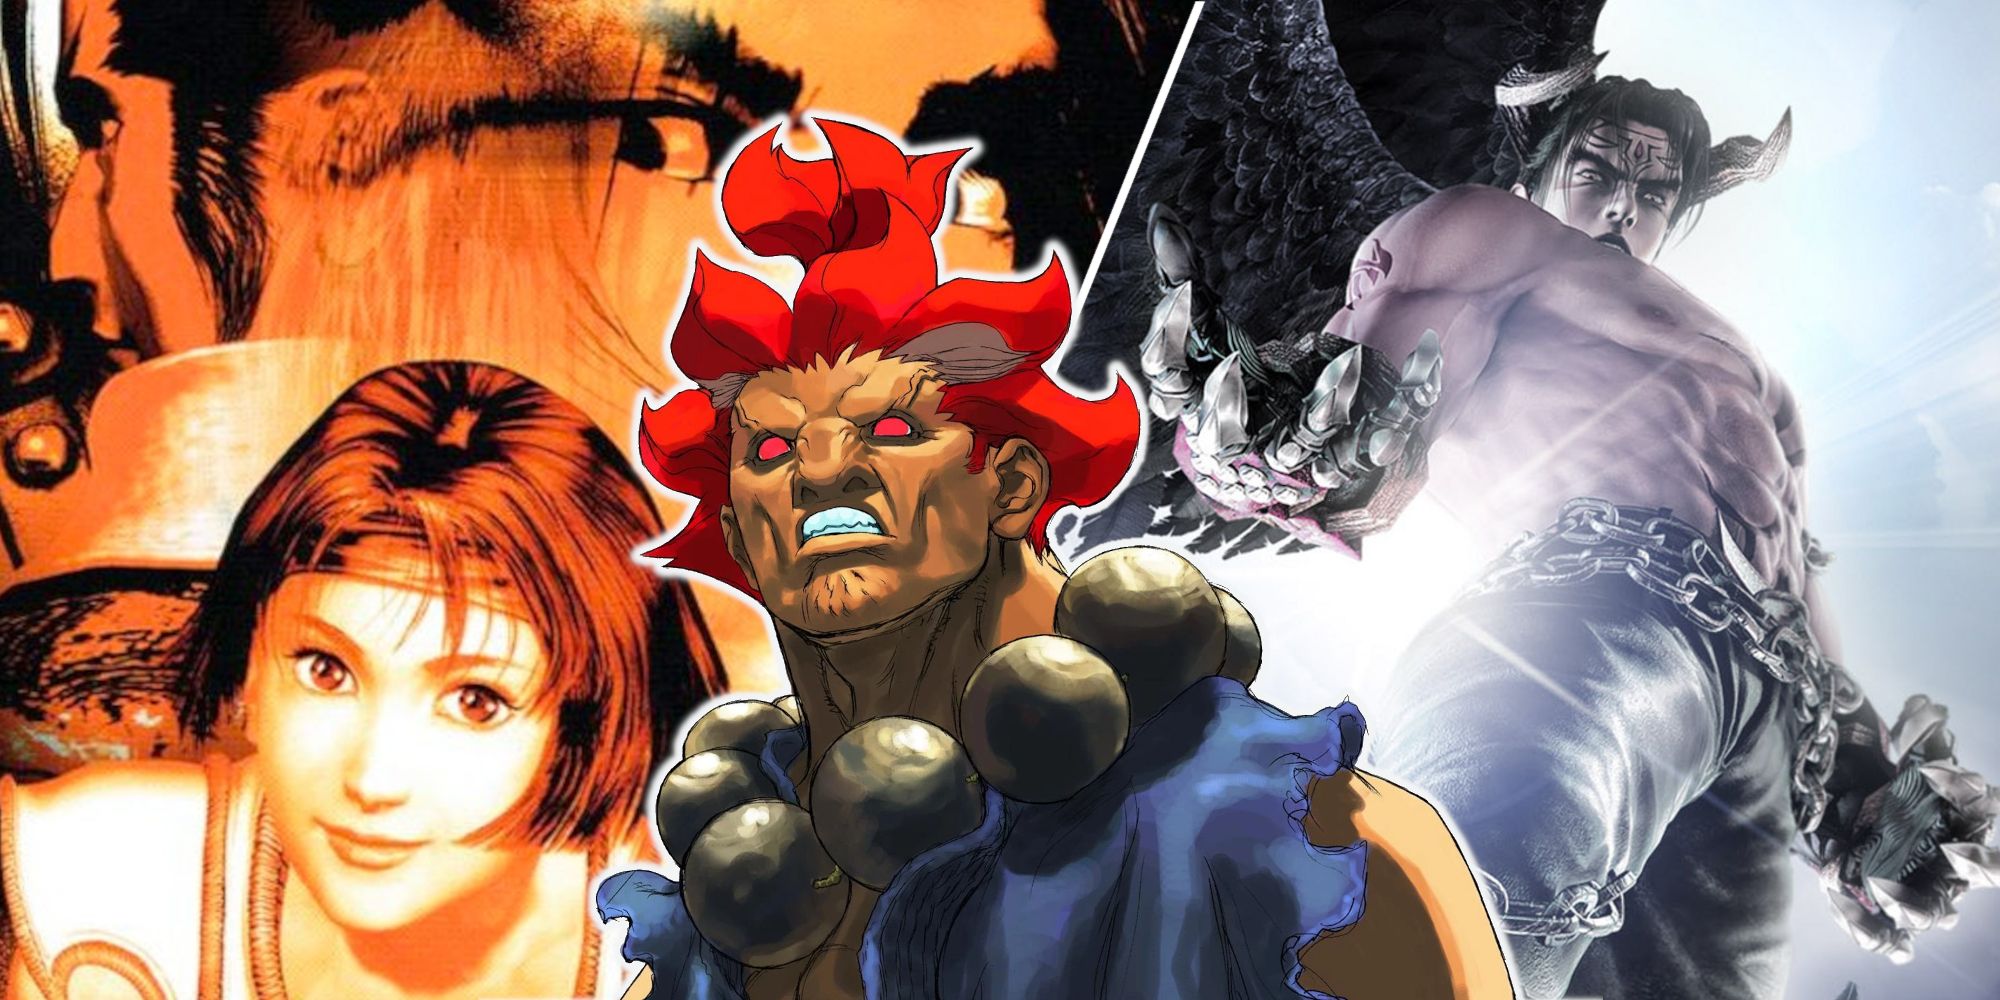 Soulcalibur and Tekken 5 split image with Akuma popping up in the center